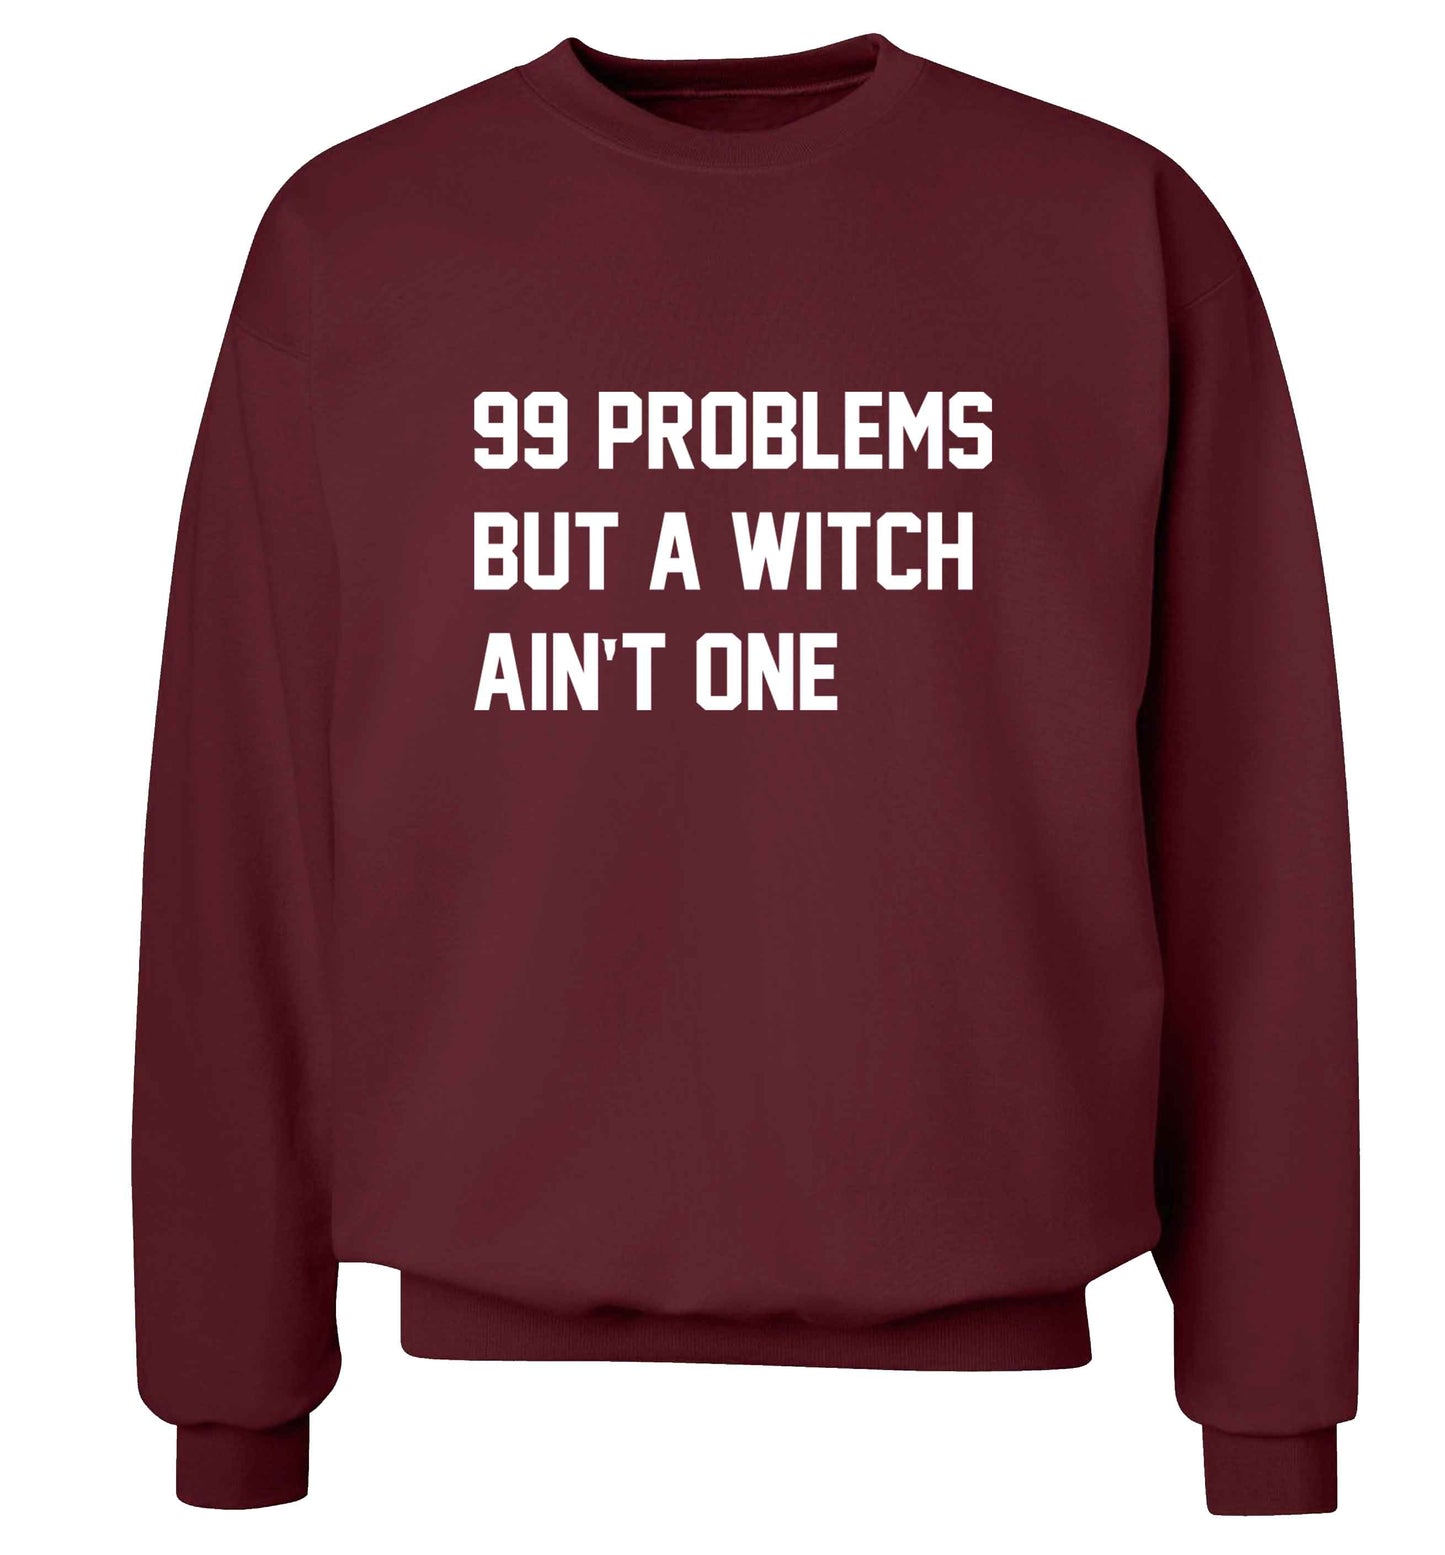 99 Problems but a witch aint one adult's unisex maroon sweater 2XL